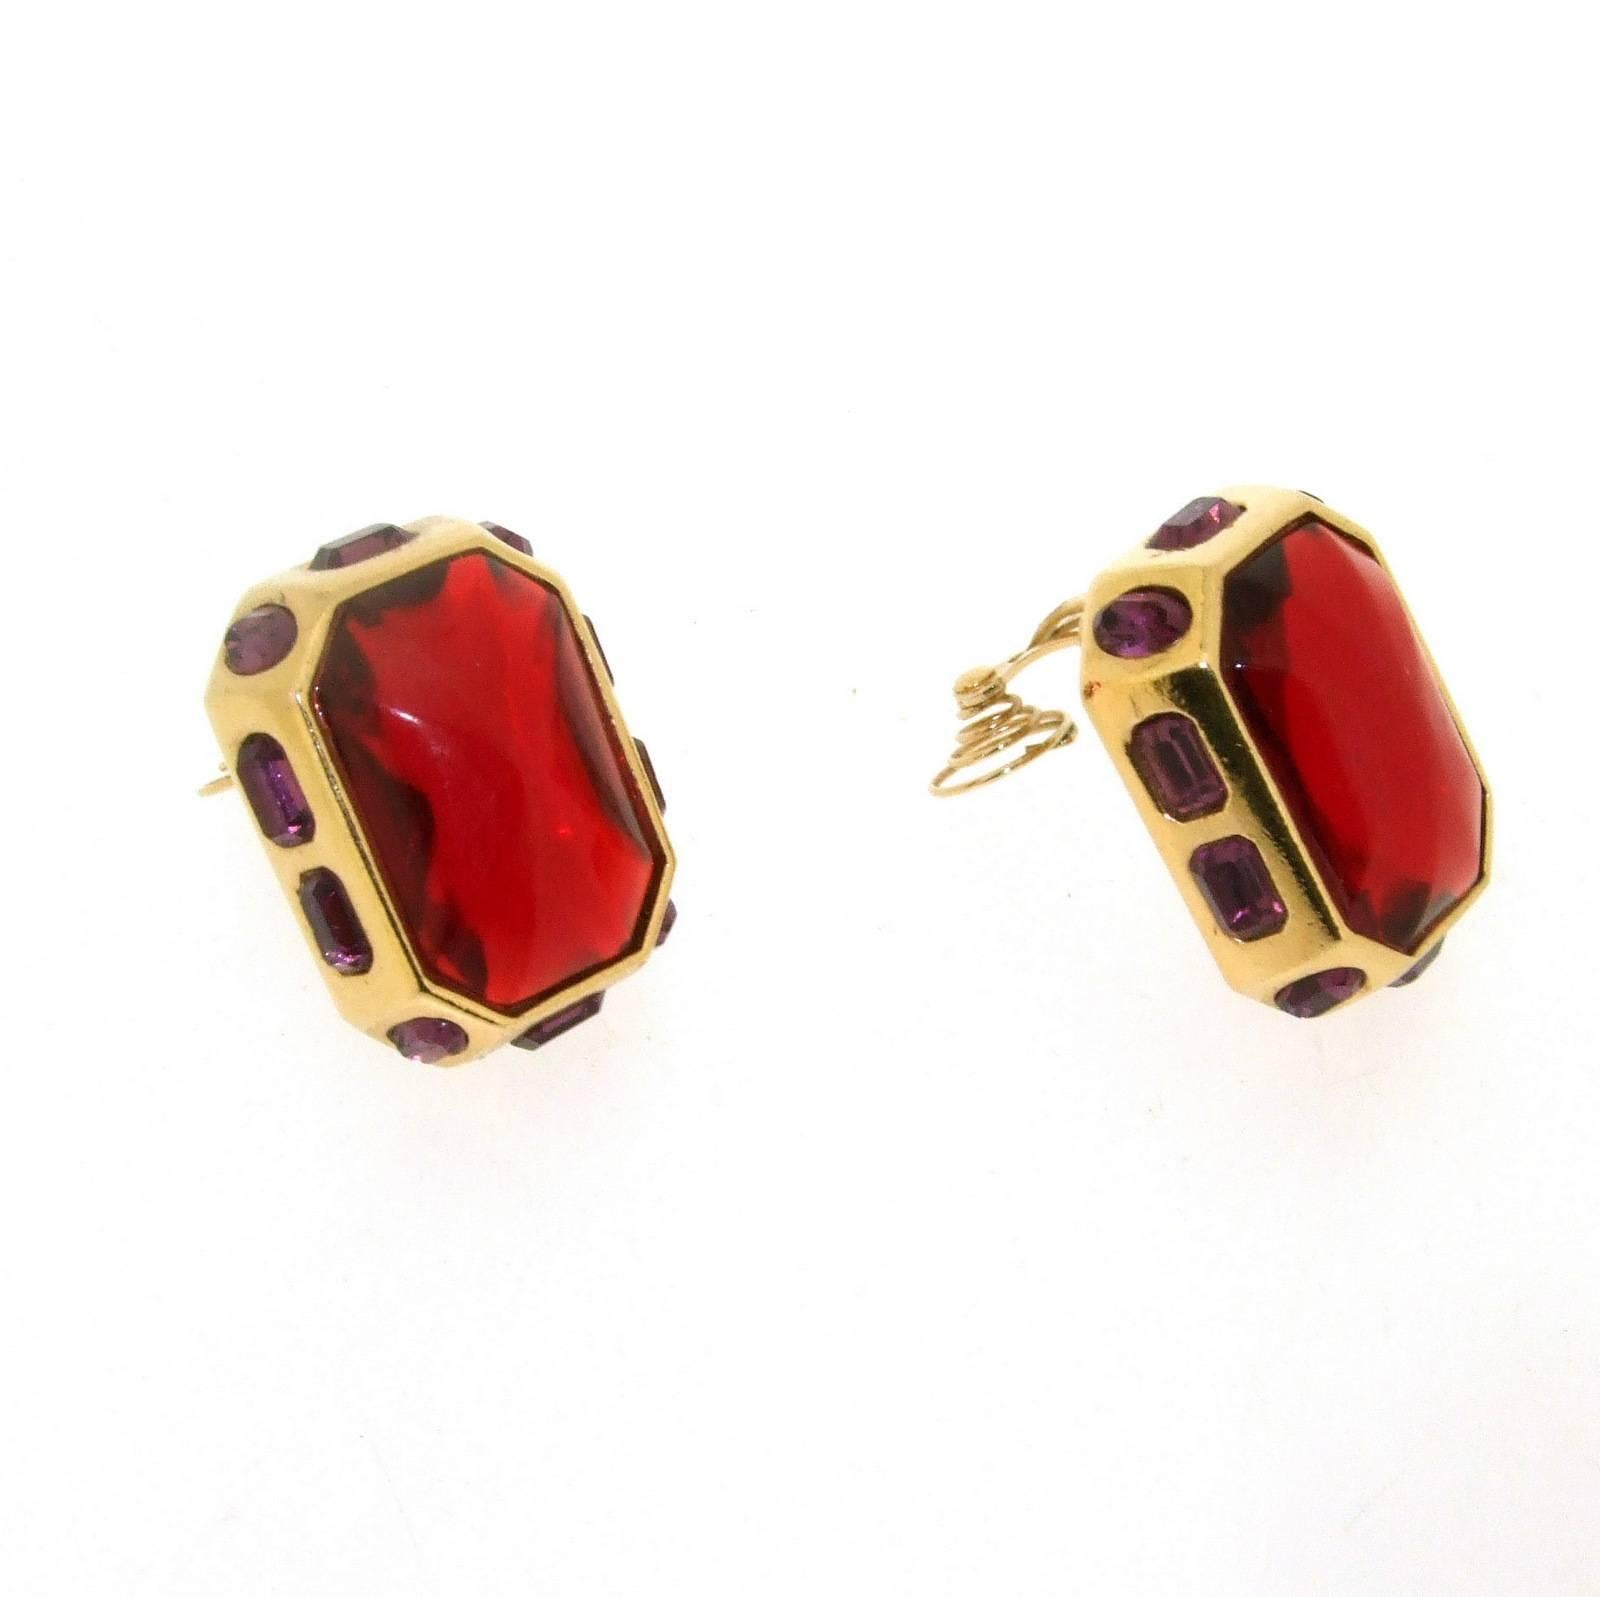 A pair of vintage clip on earrings by Yves Saint Laurent set with red and purple crystal.